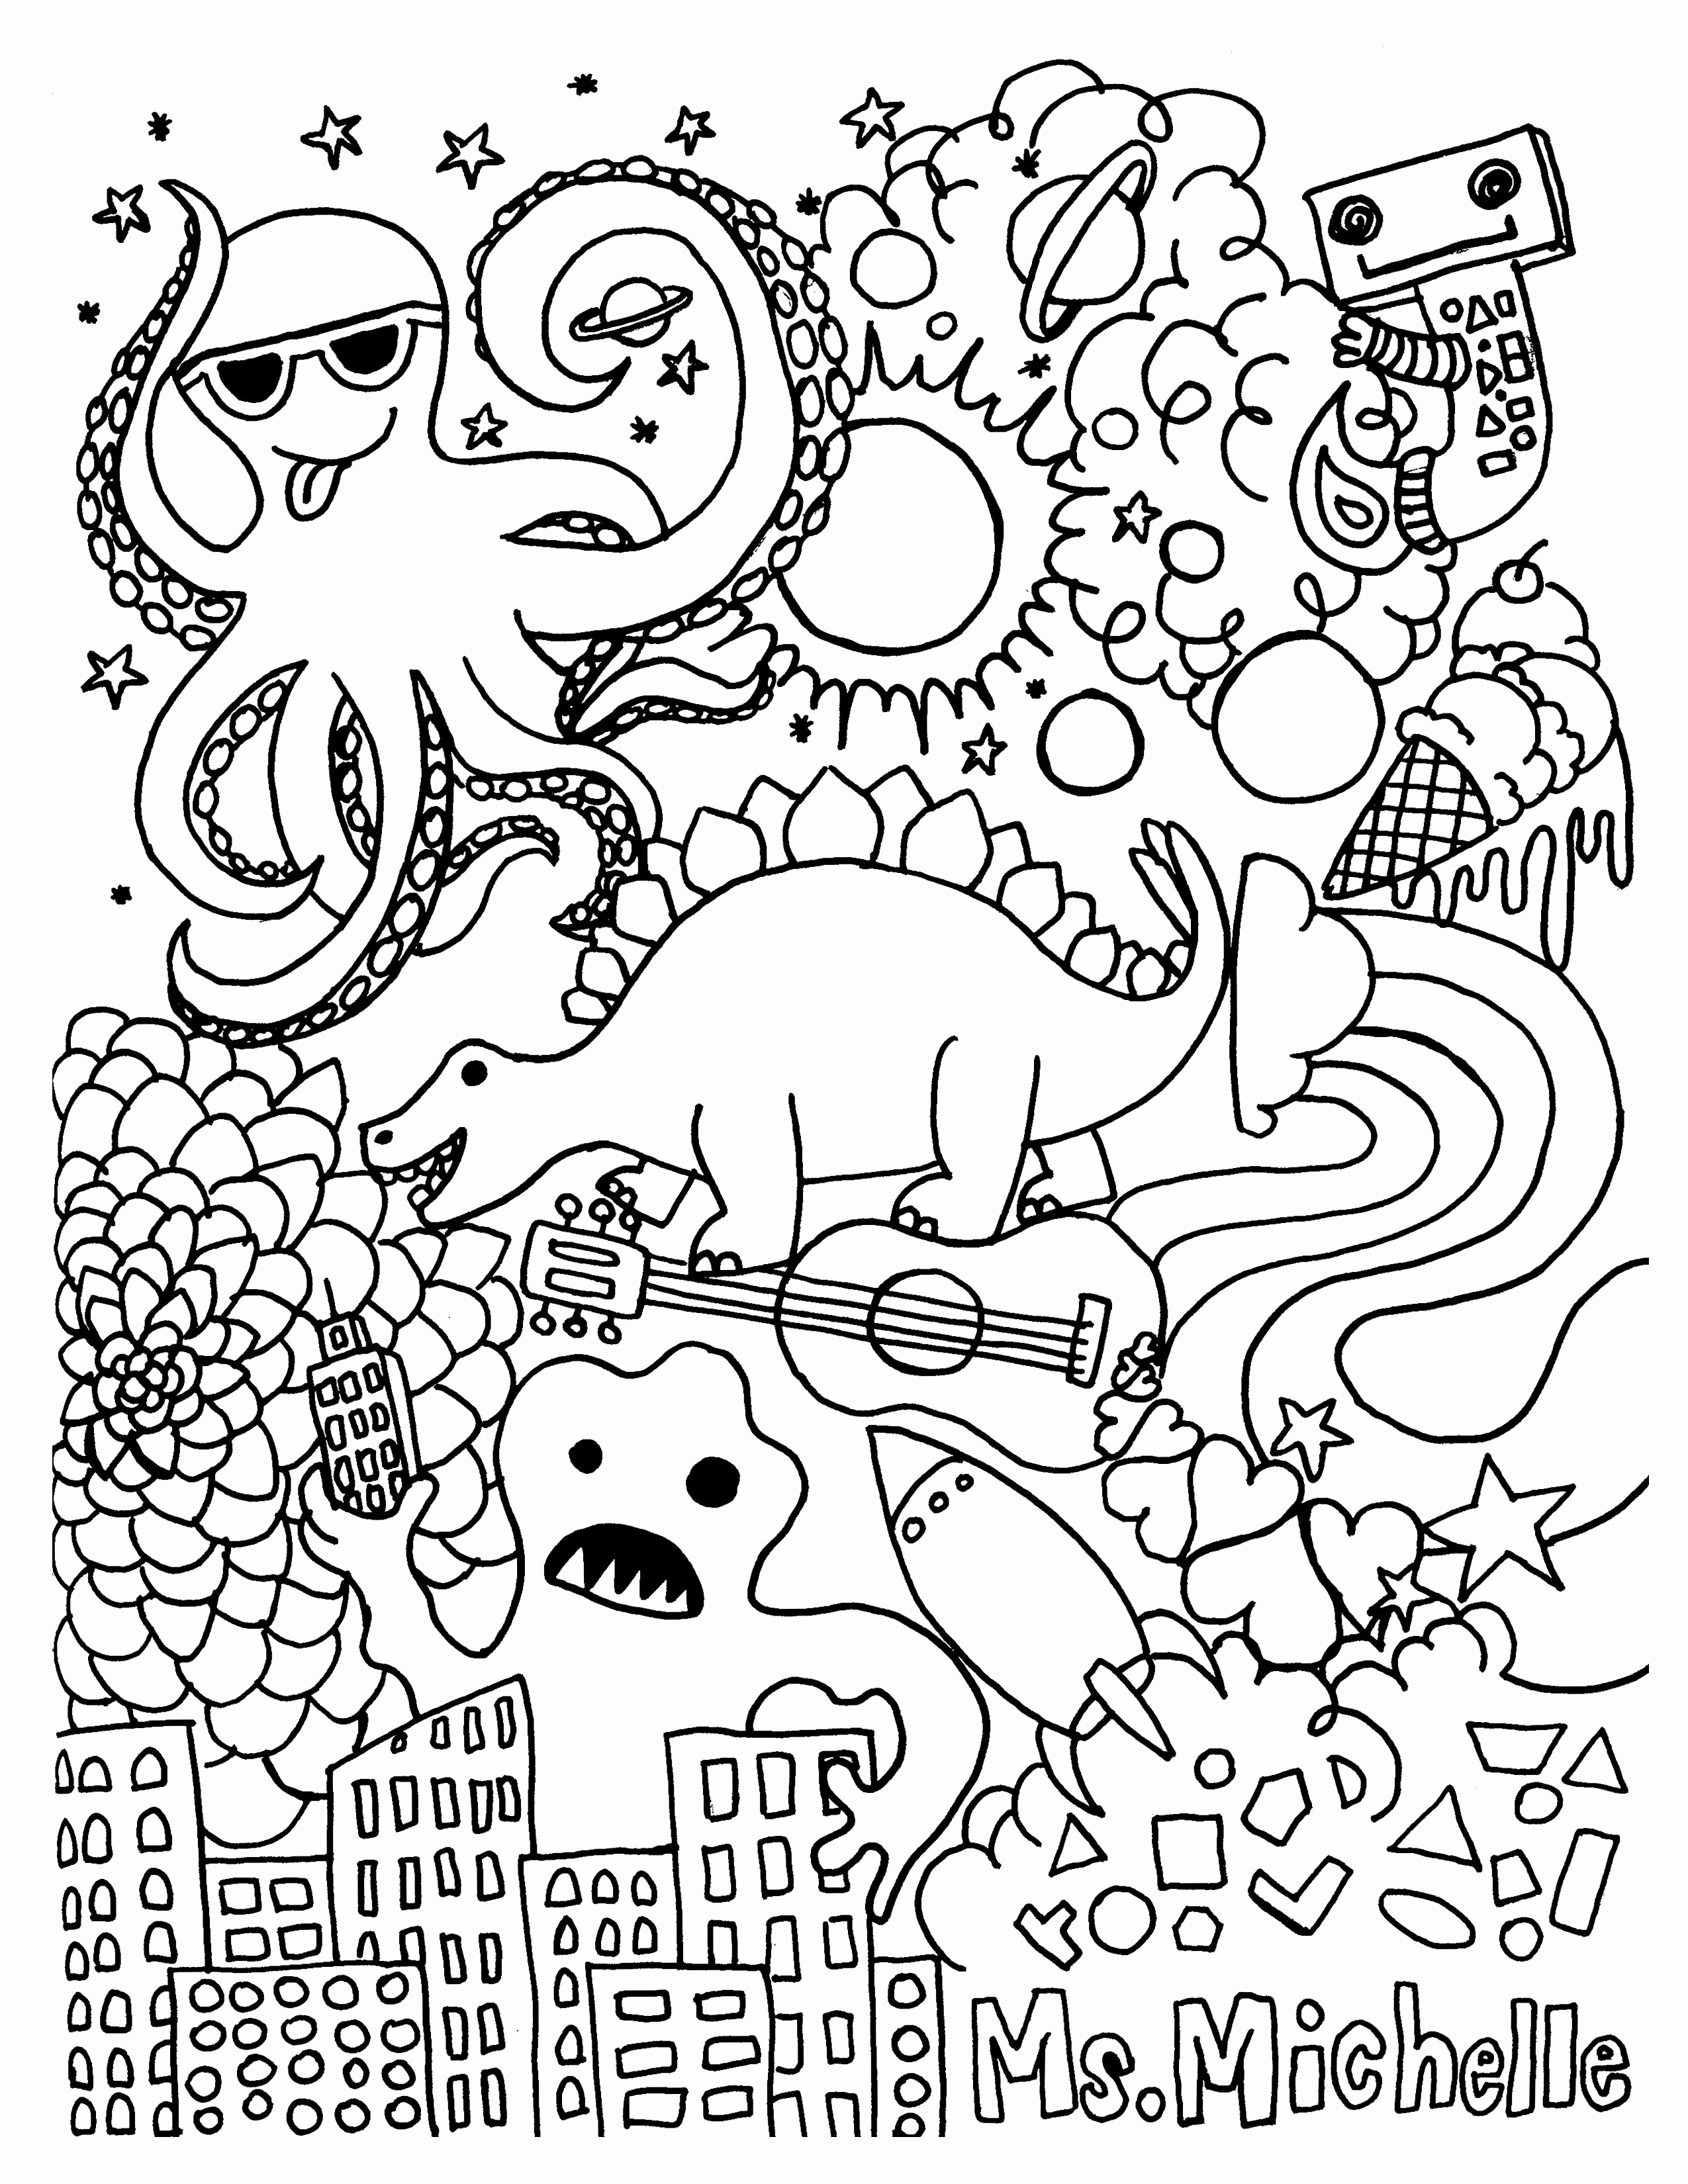 Dinosaur Coloring Pages Inspirational Color Sheets For Kids Inspirational Cool Coloring Page Unique Witch